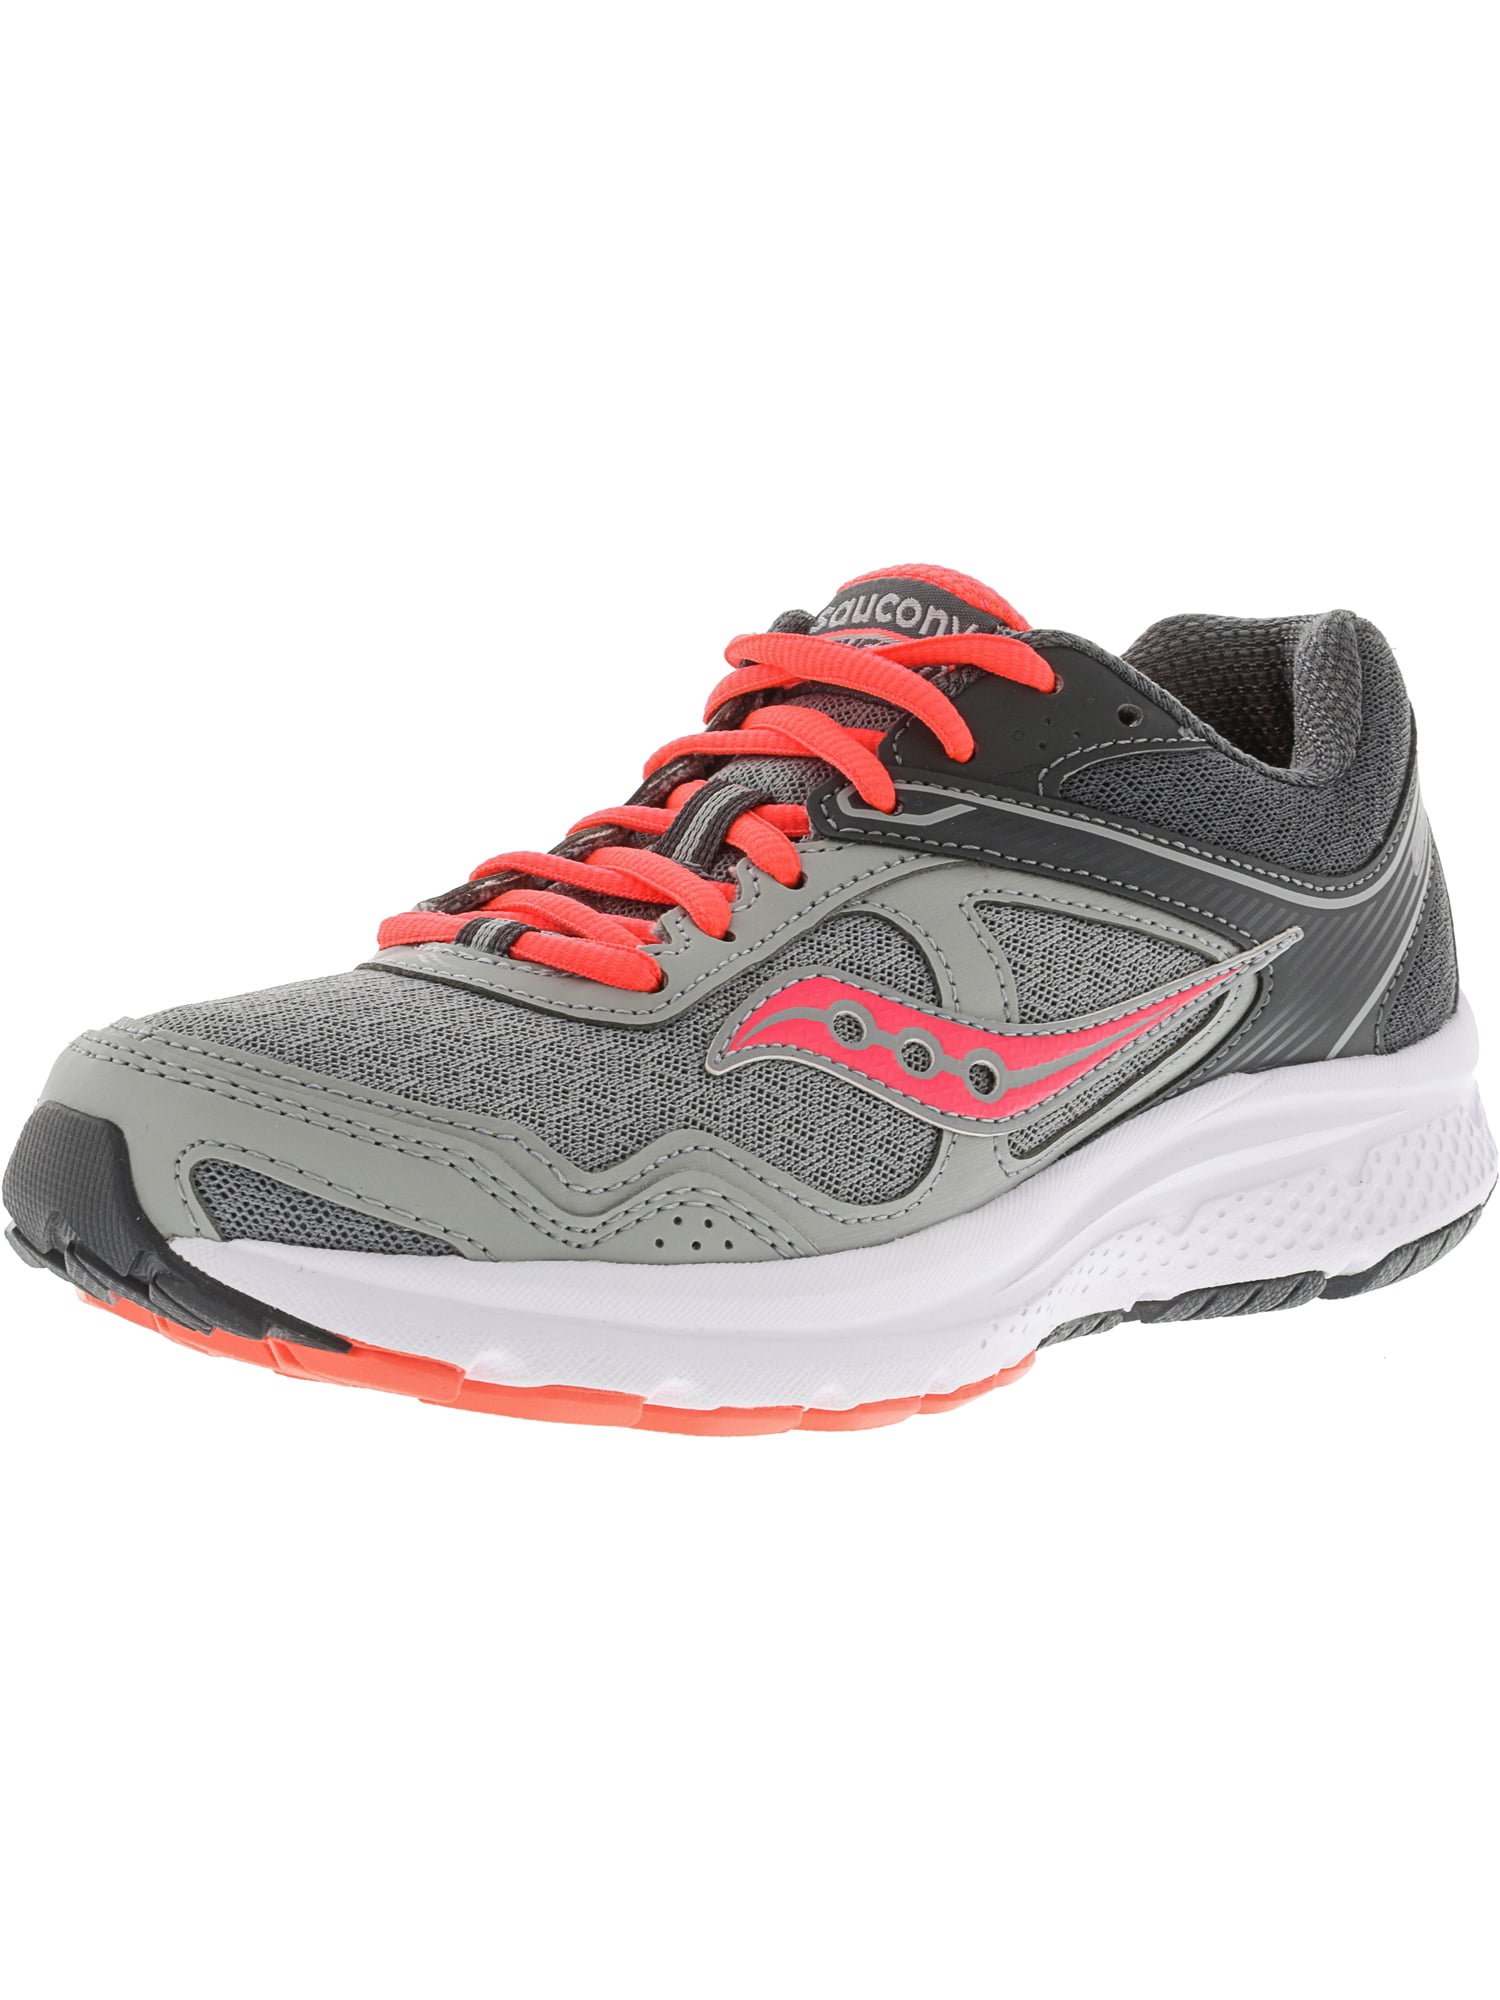 Saucony Womens Cohesion 10 Running Shoes Grey/Purple 23T4 